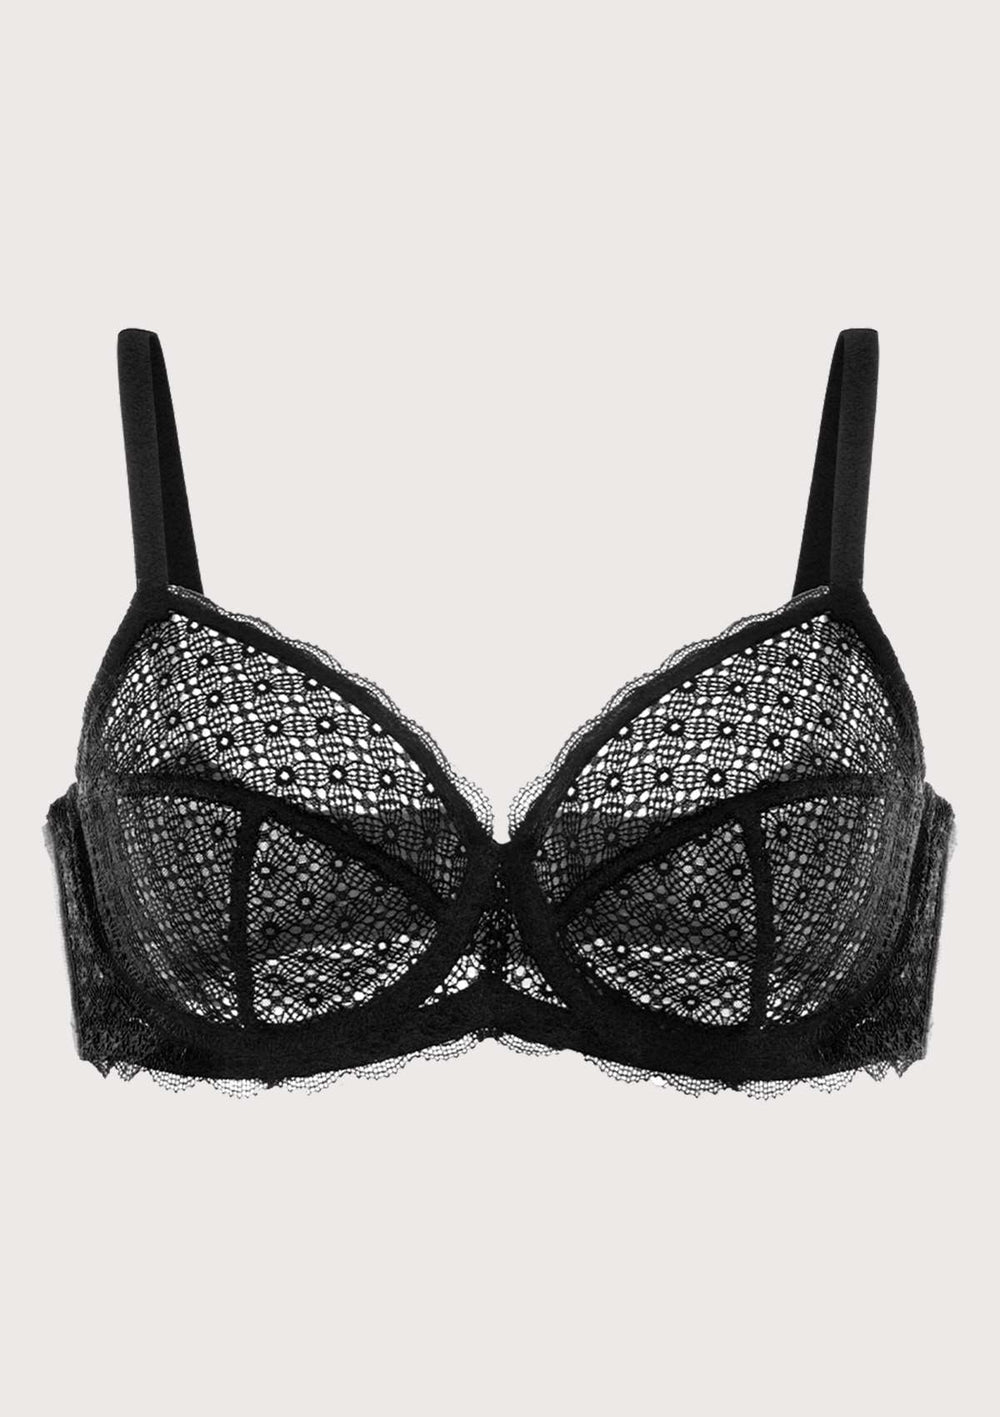 I'm a 38DD and I've Been Buying and Wearing This Delicate Lace Bra